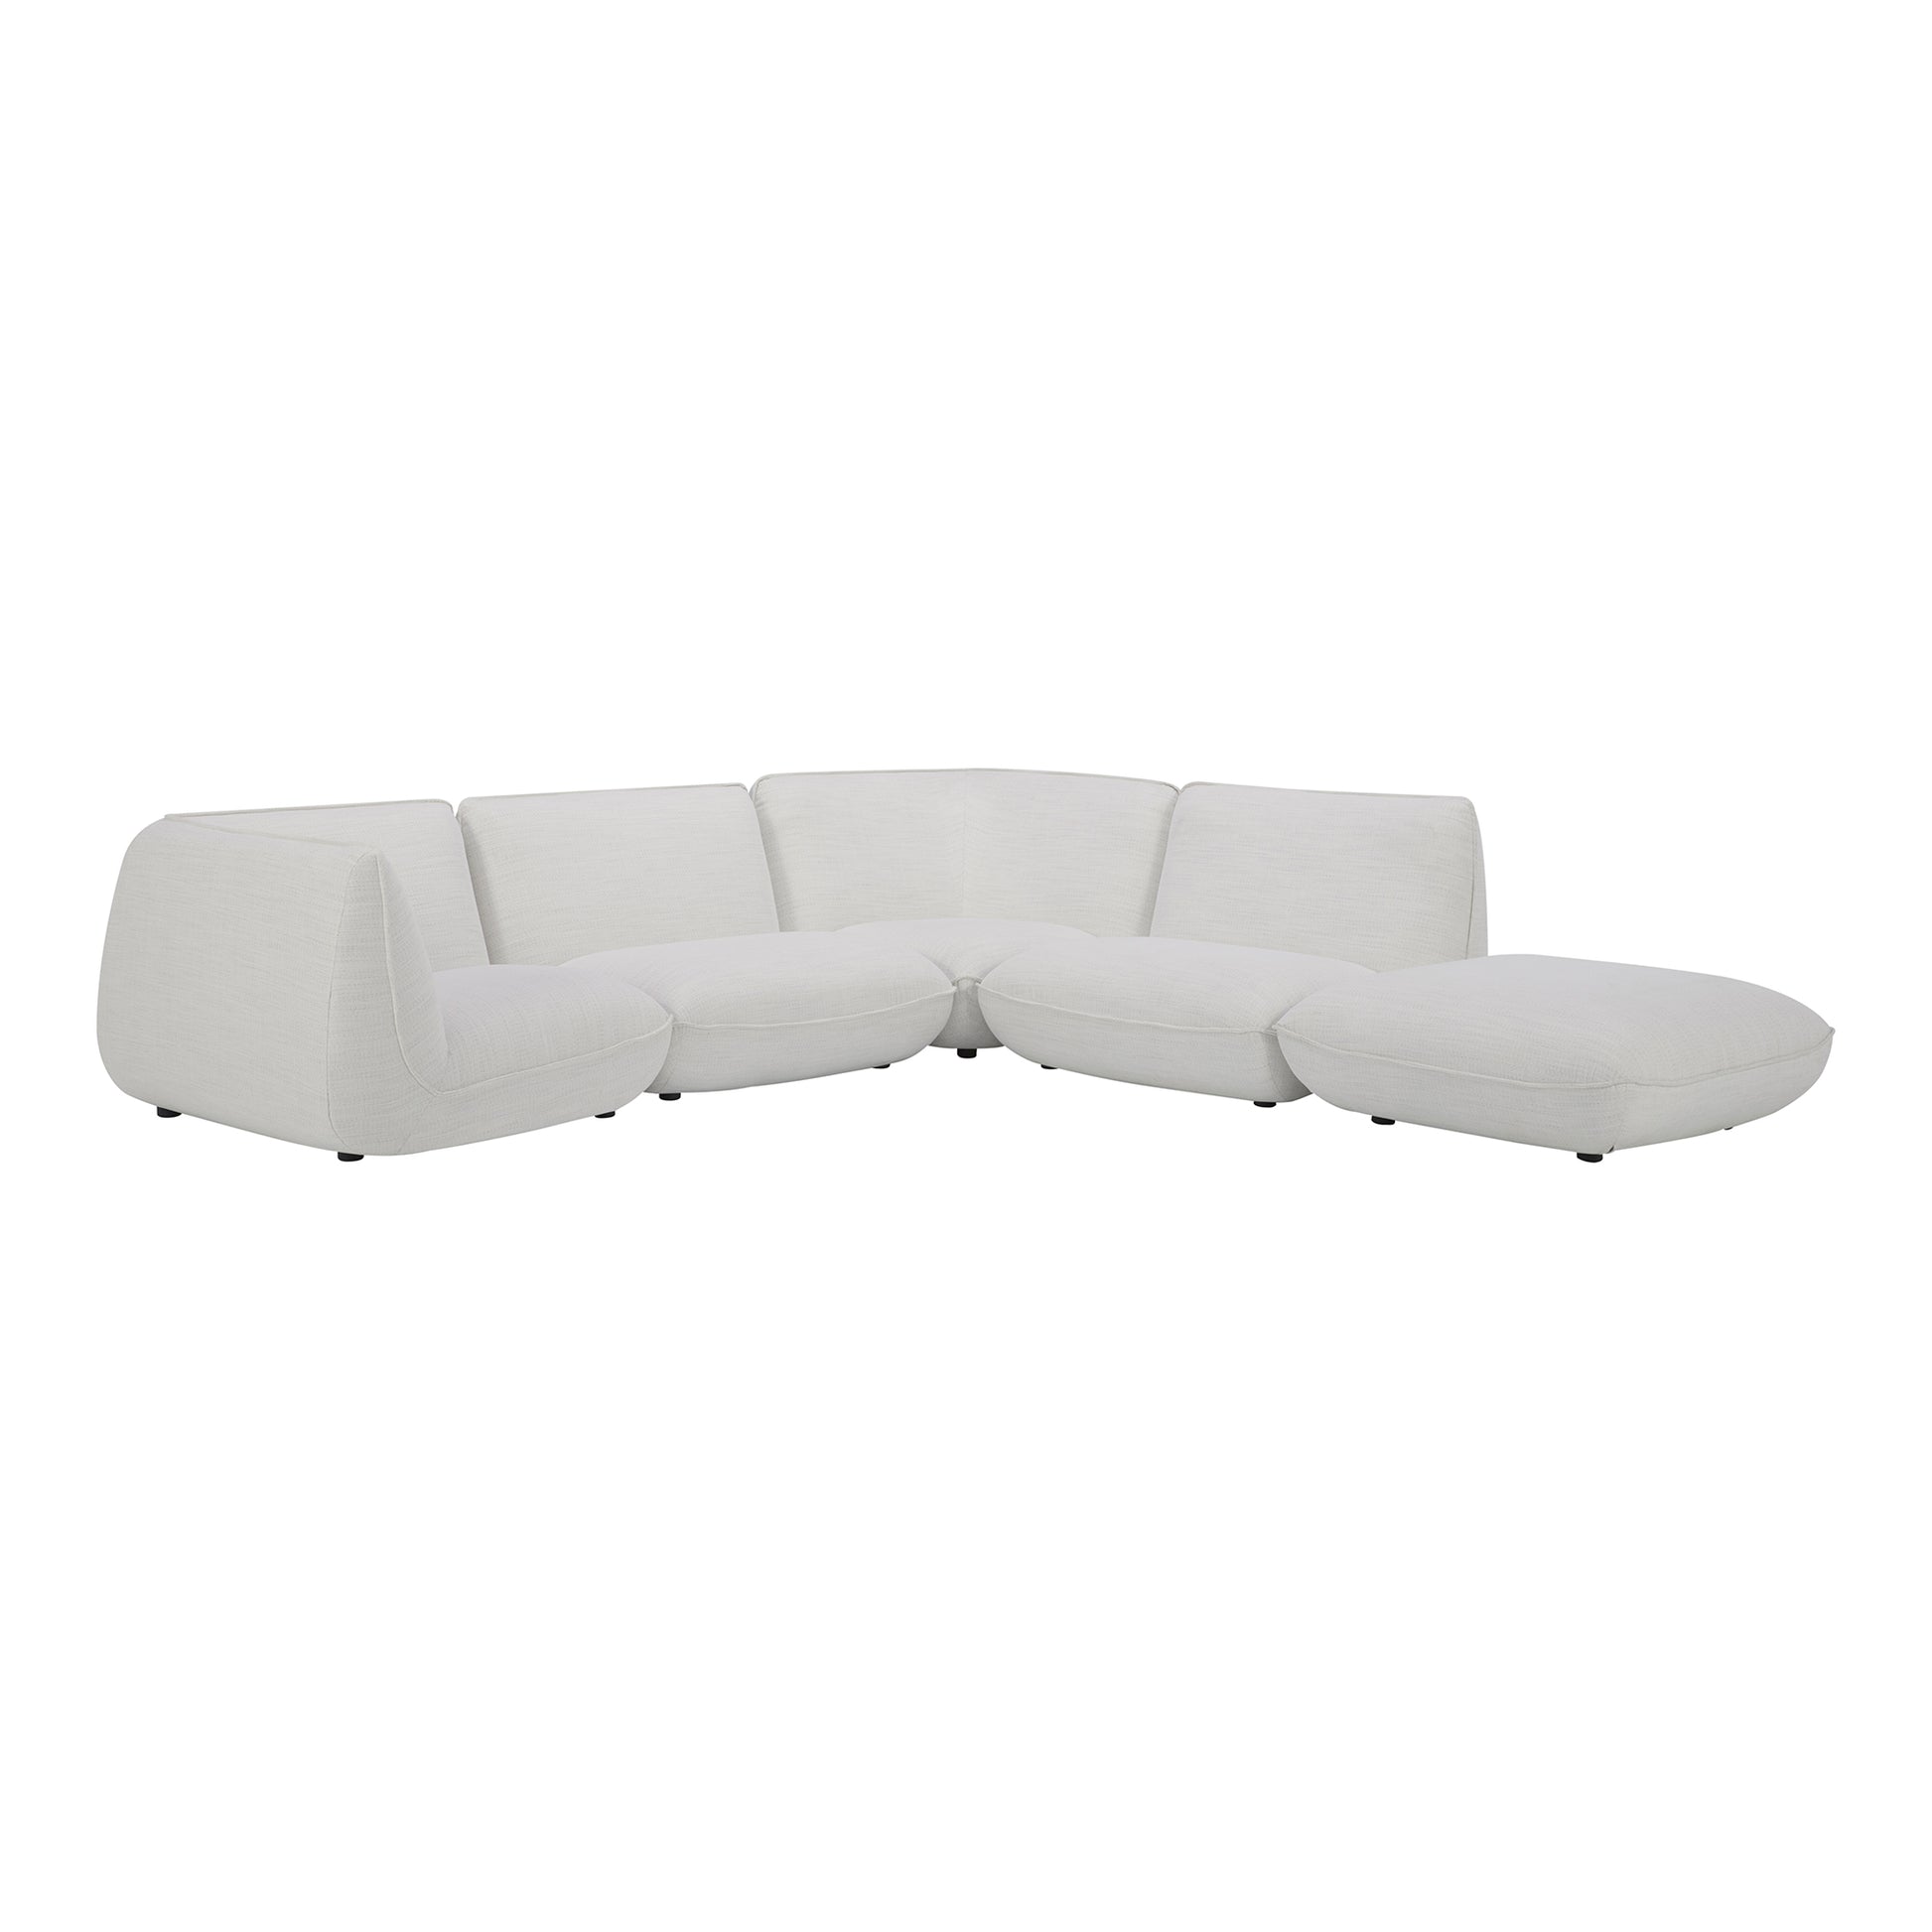 Moes Home Modular Sectionals Zeppelin White Contemporary Furniture